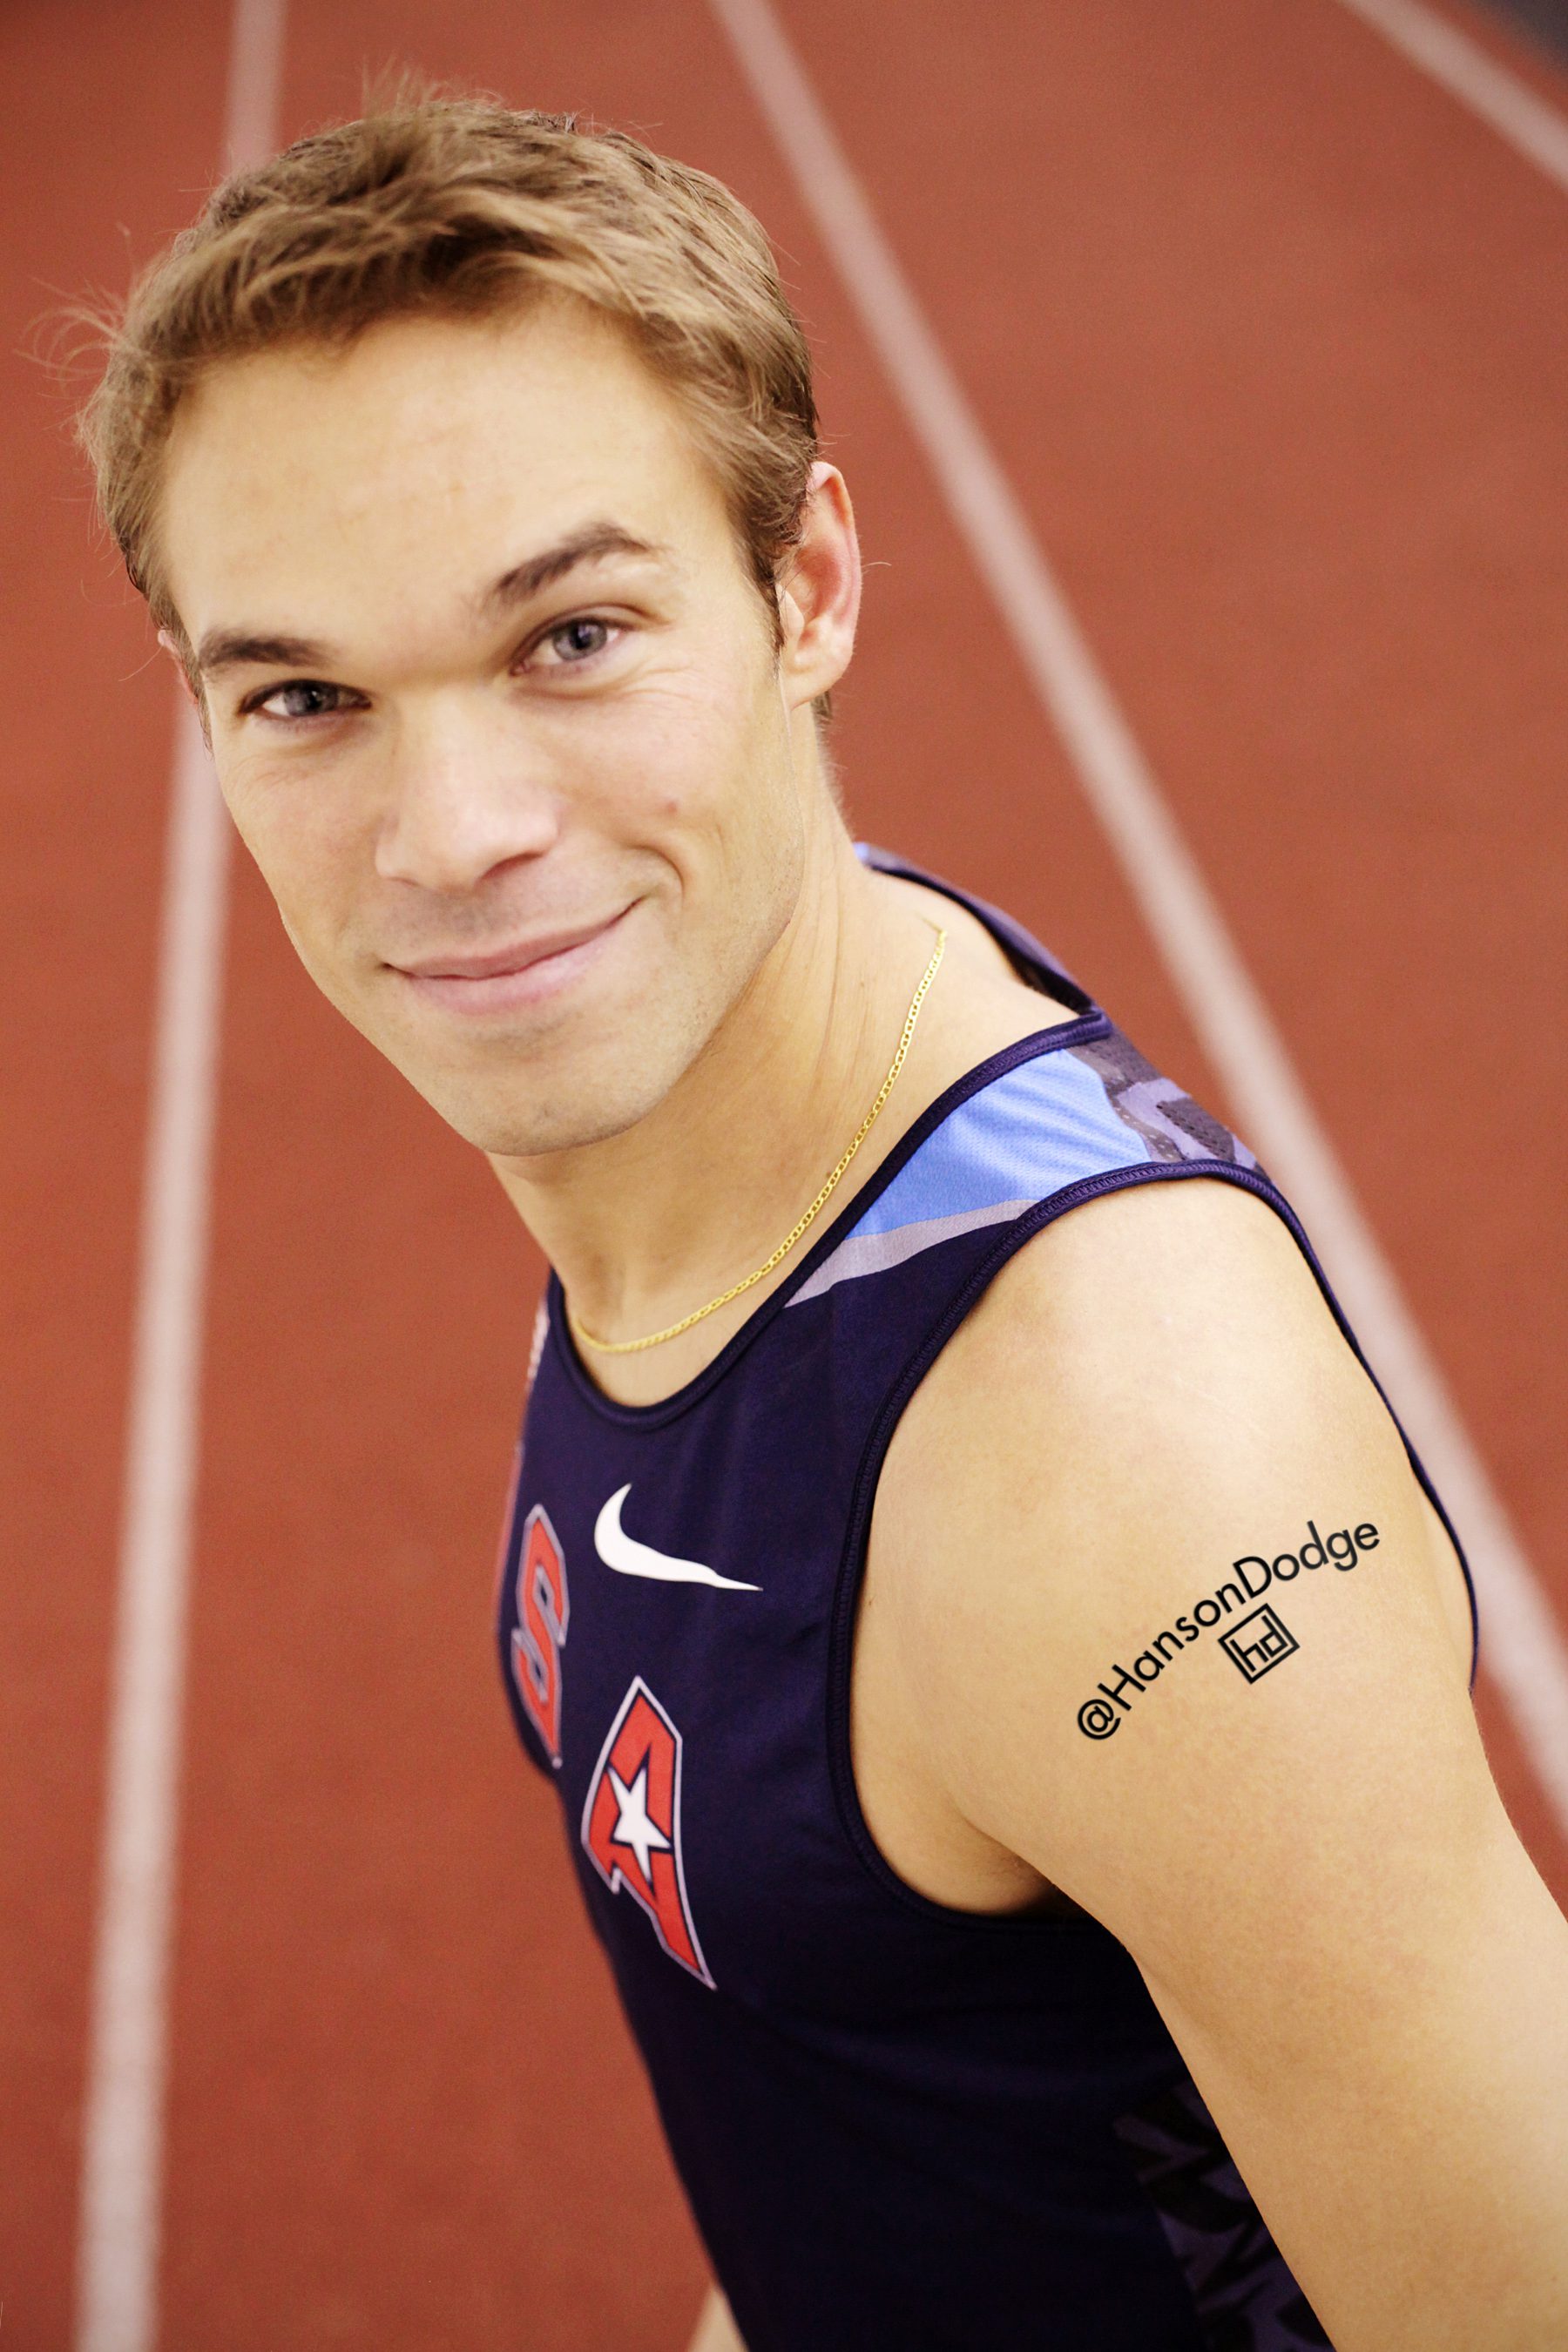 track and field tattoos